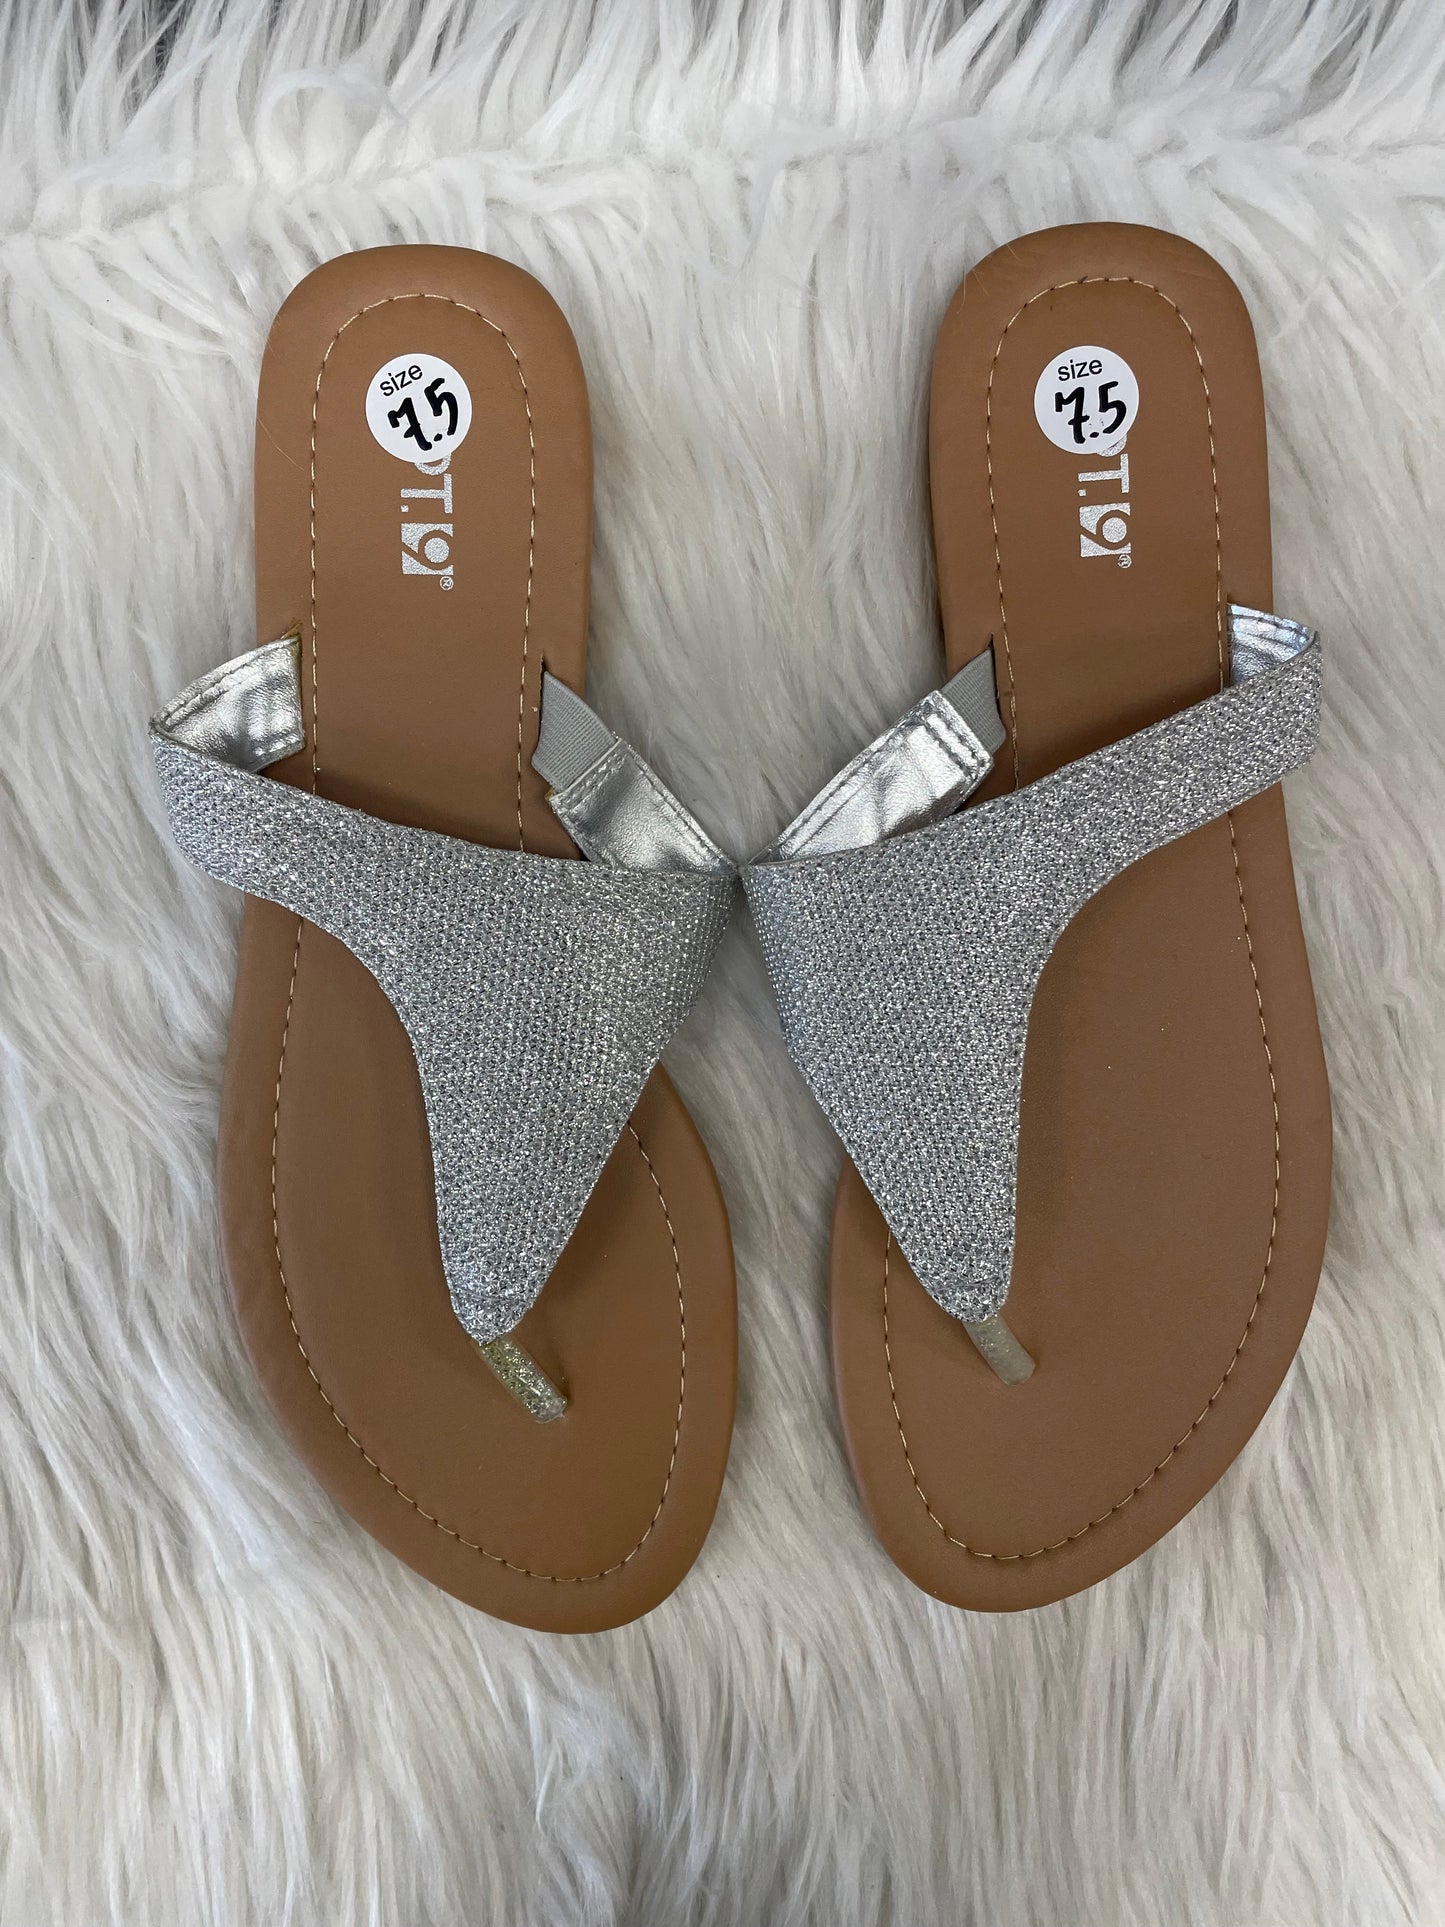 Sandals Flats By Apt 9  Size: 7.5